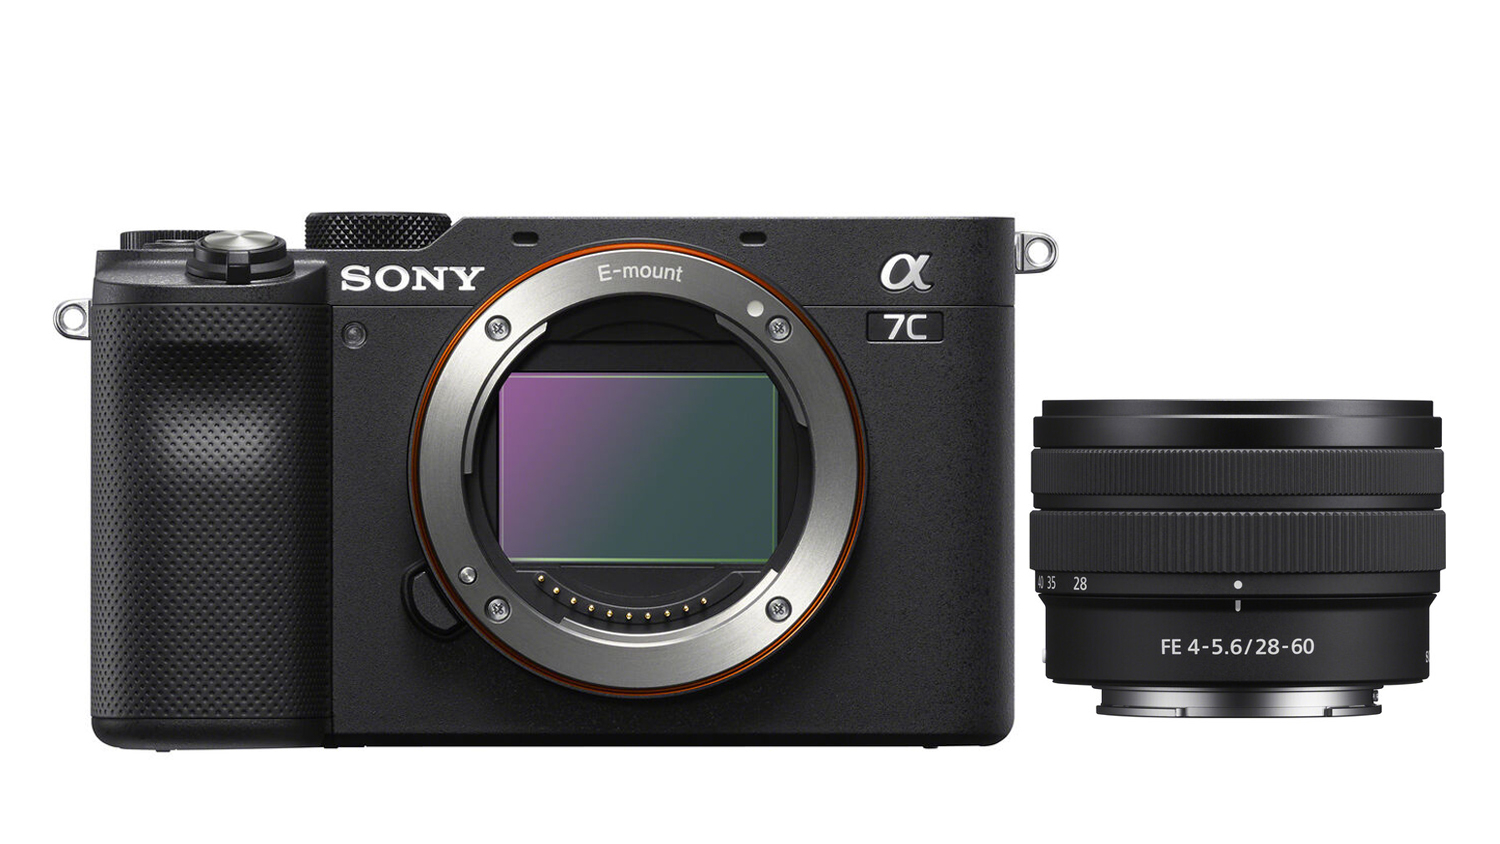 Sony Alpha A7C Full Frame Mirrorless Camera with 28-60mm f/4-5.6